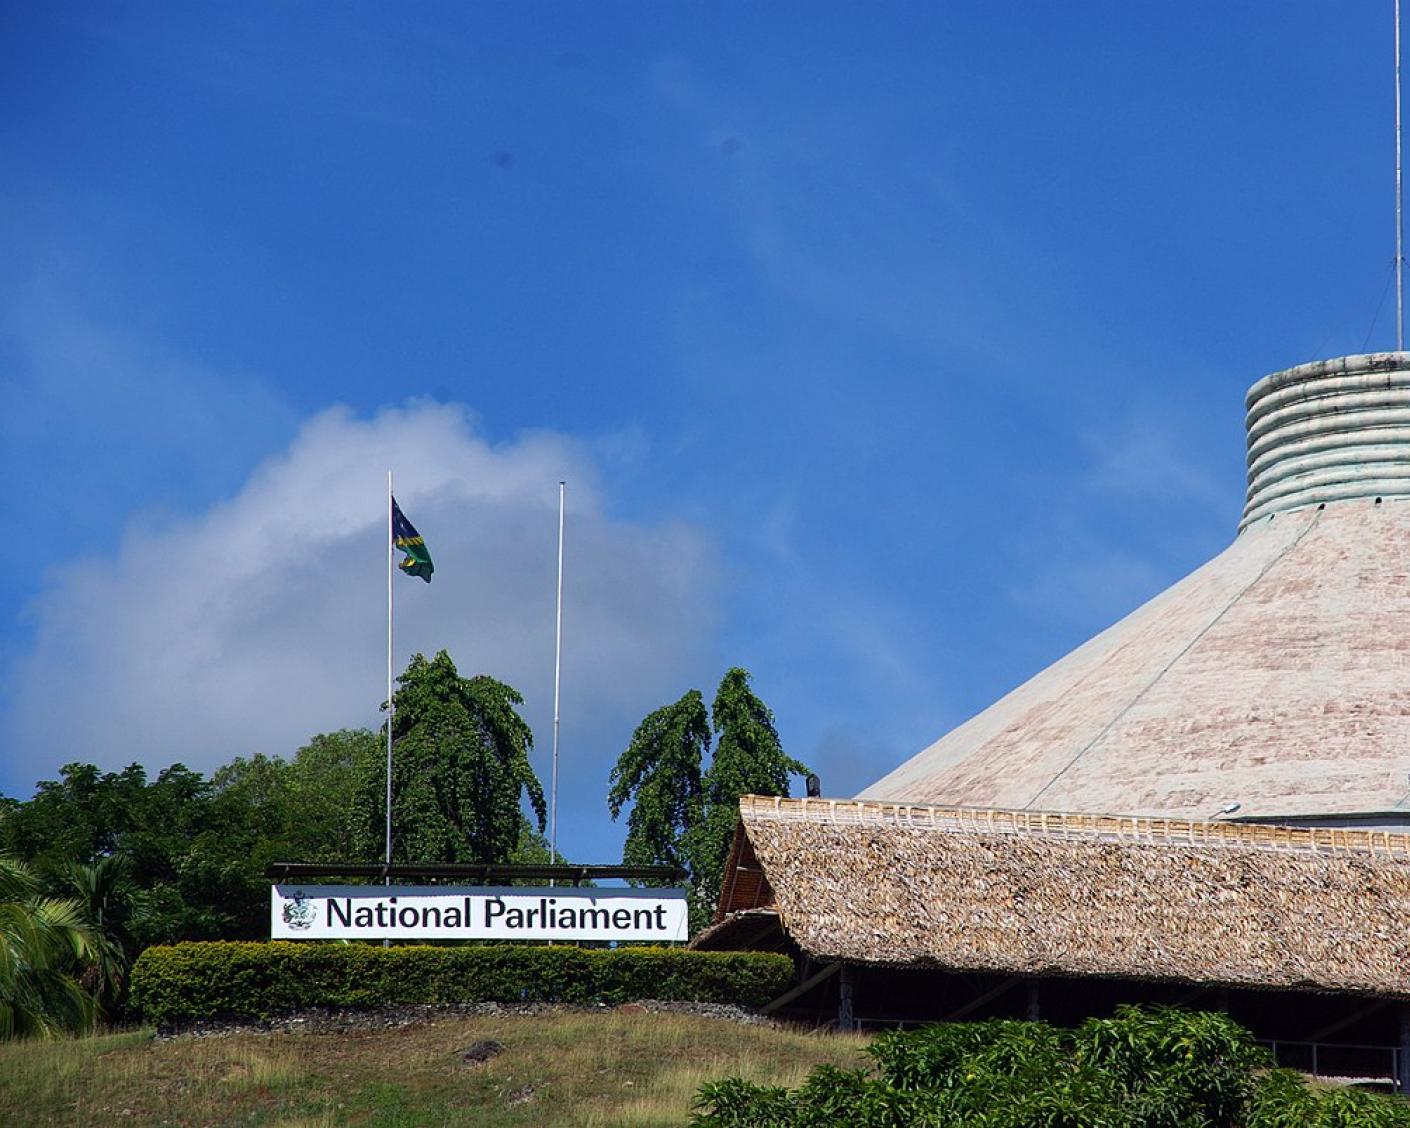 The exterior of the national parliament of the Solomon Islands